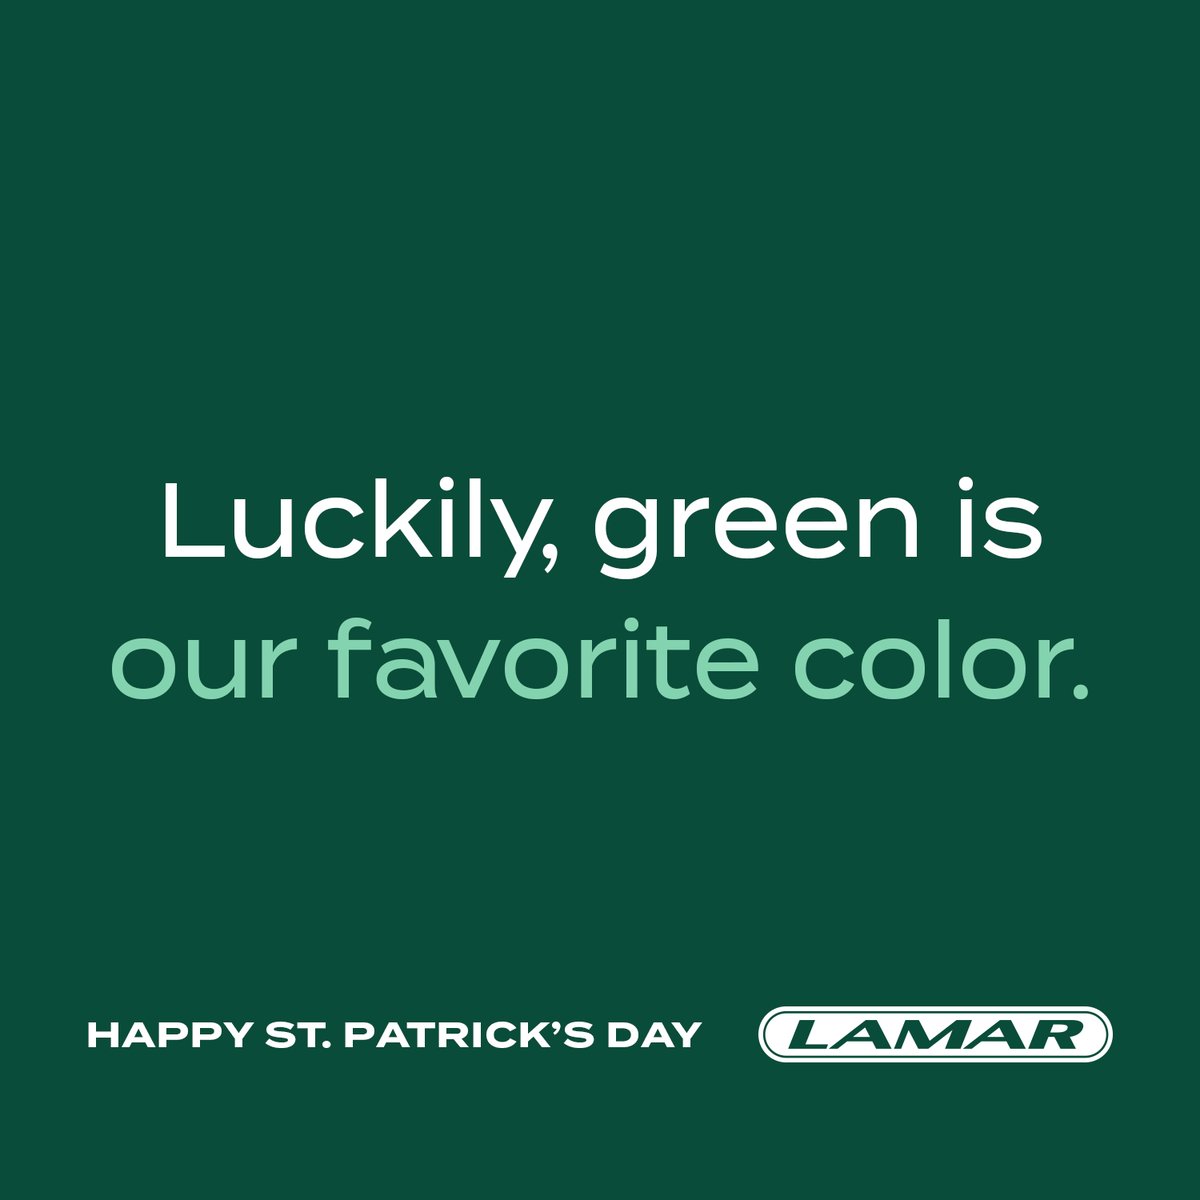 As we honor Irish culture across the country, we hope all our clients, partners, and friends have a lucky, fun, and safe day of celebration. Happy St. Patrick's Day! #stpatricksday #LamarAdvertising